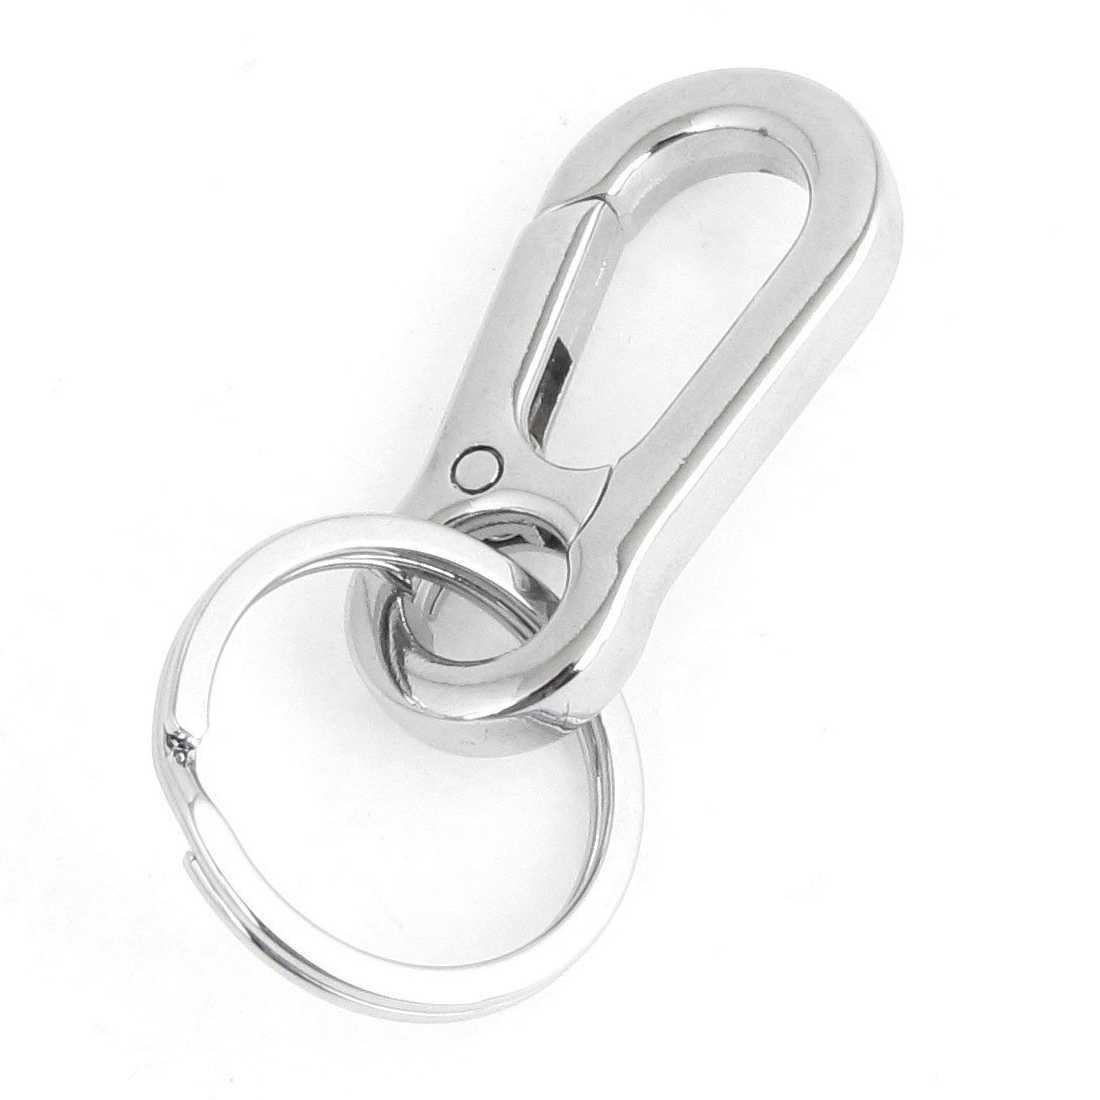 2015 Hot And NewGlossy Metal Lobster Clasp Single Ring Keyring Key Chain